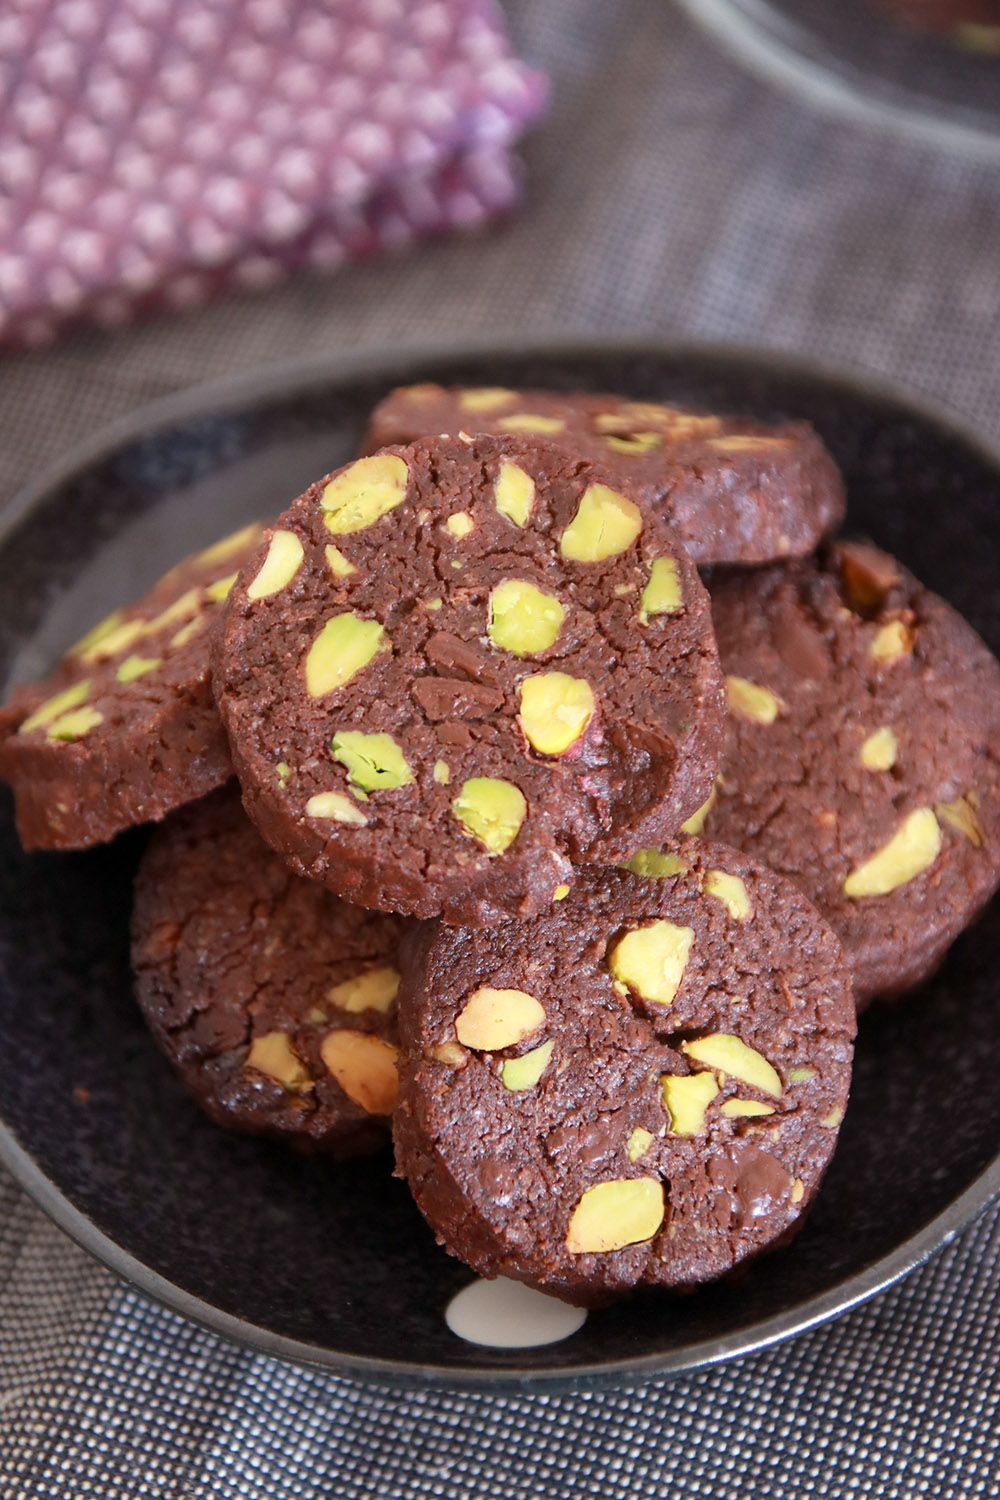 Pistachio and Chocolate Cookies | Photo: Natalie Levin